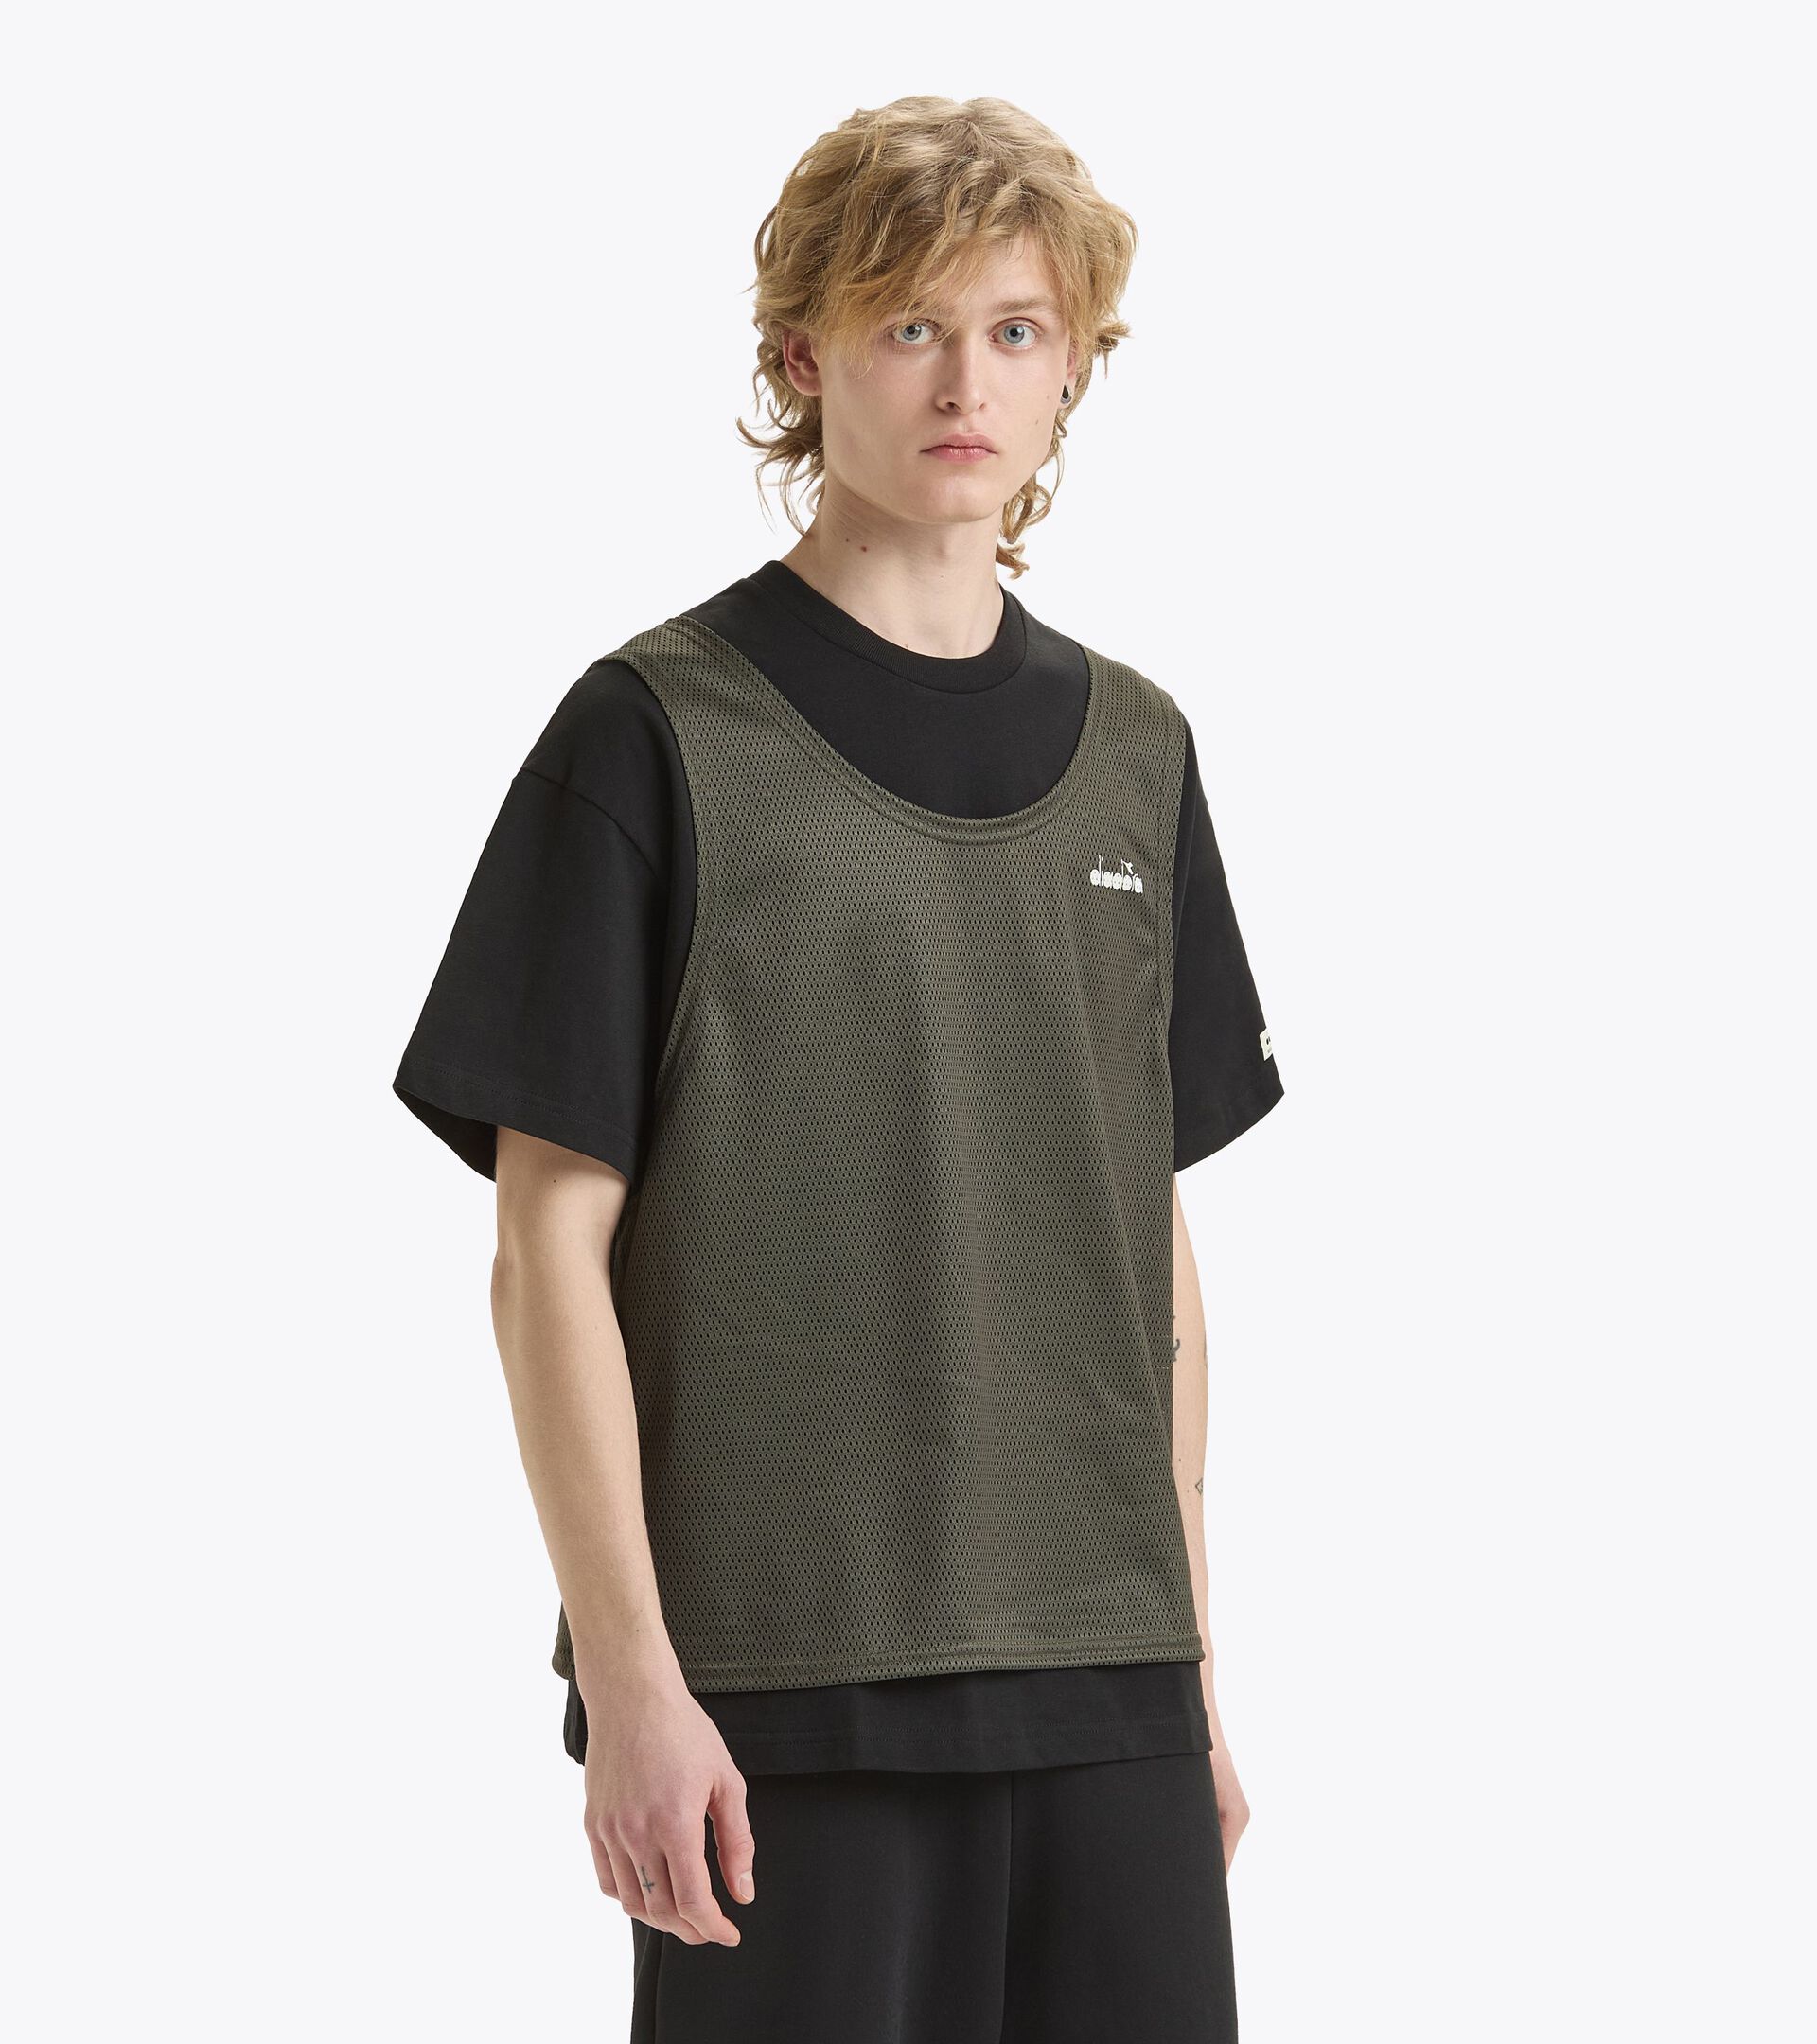 T-shirt e canotta 2 in 1 - Made in Italy - Gender Neutral
 T-SHIRT SS 2-IN-1 LEGACY VERDE KIWI - Diadora